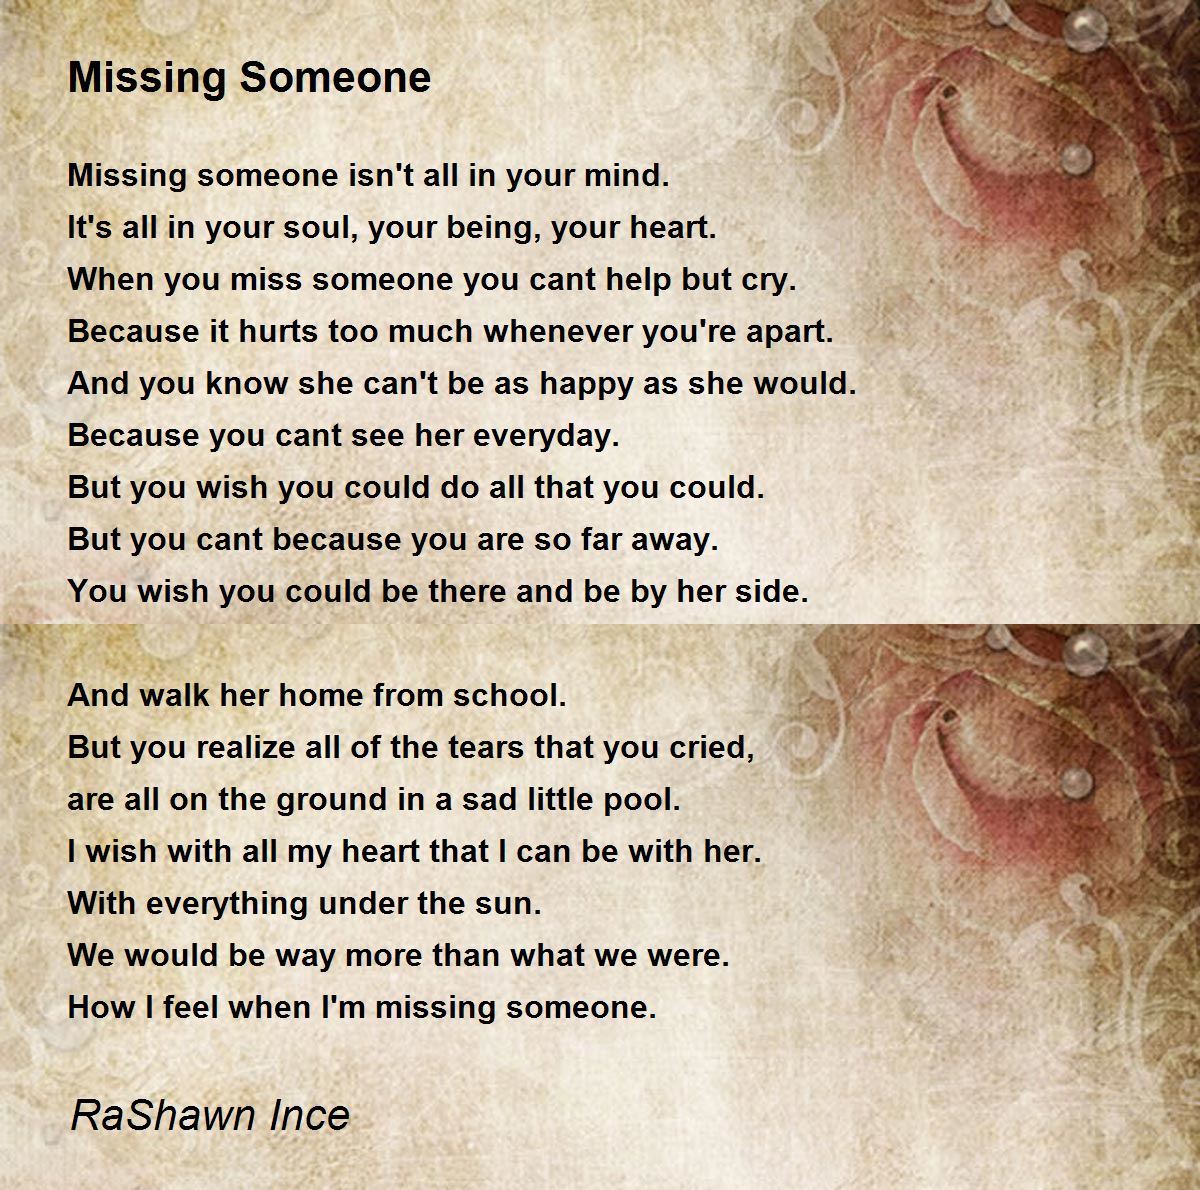 Missing Someone - Missing Someone Poem by RaShawn Ince